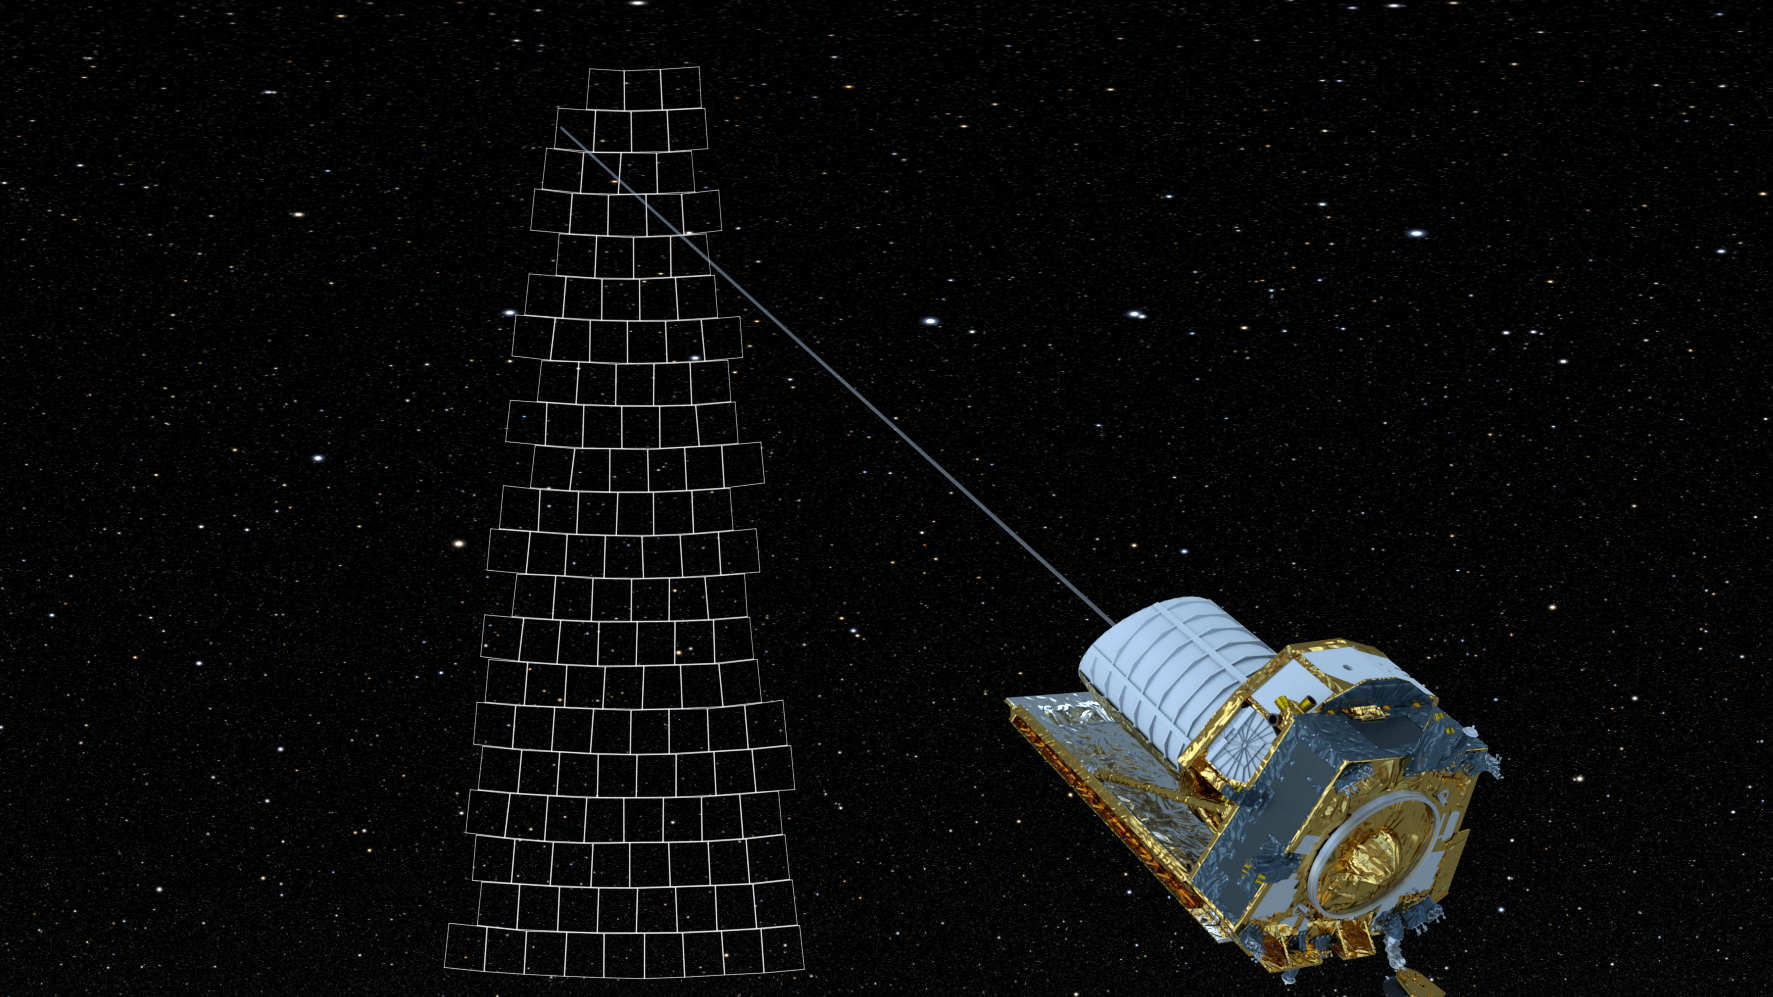 How will Europe's Euclid space telescope see into the dark universe?